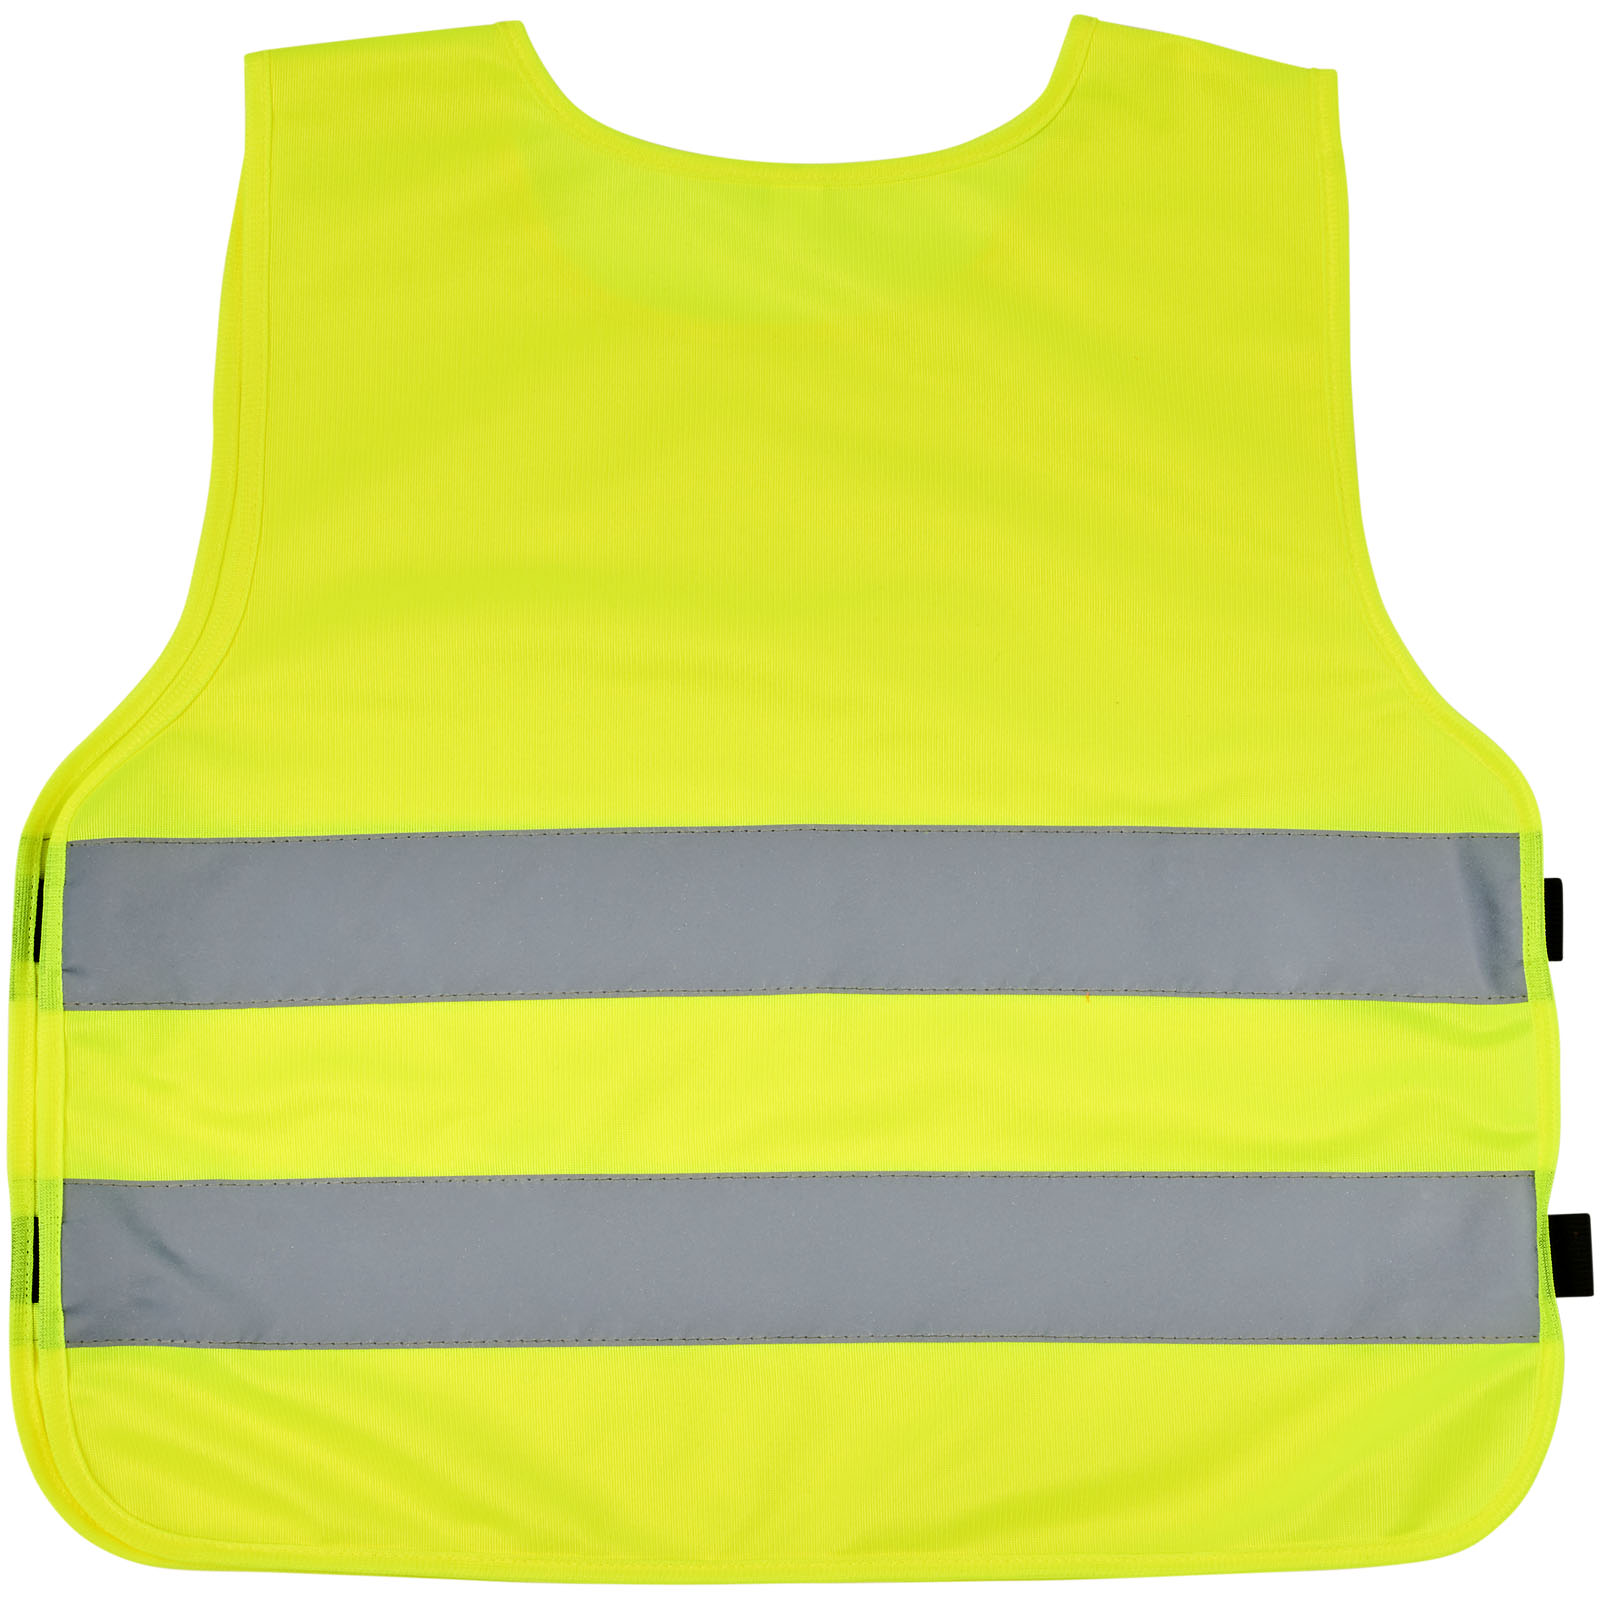 Advertising Safety Vests - RFX™ Odile XXS safety vest with hook&loop for kids age 3-6 - 2